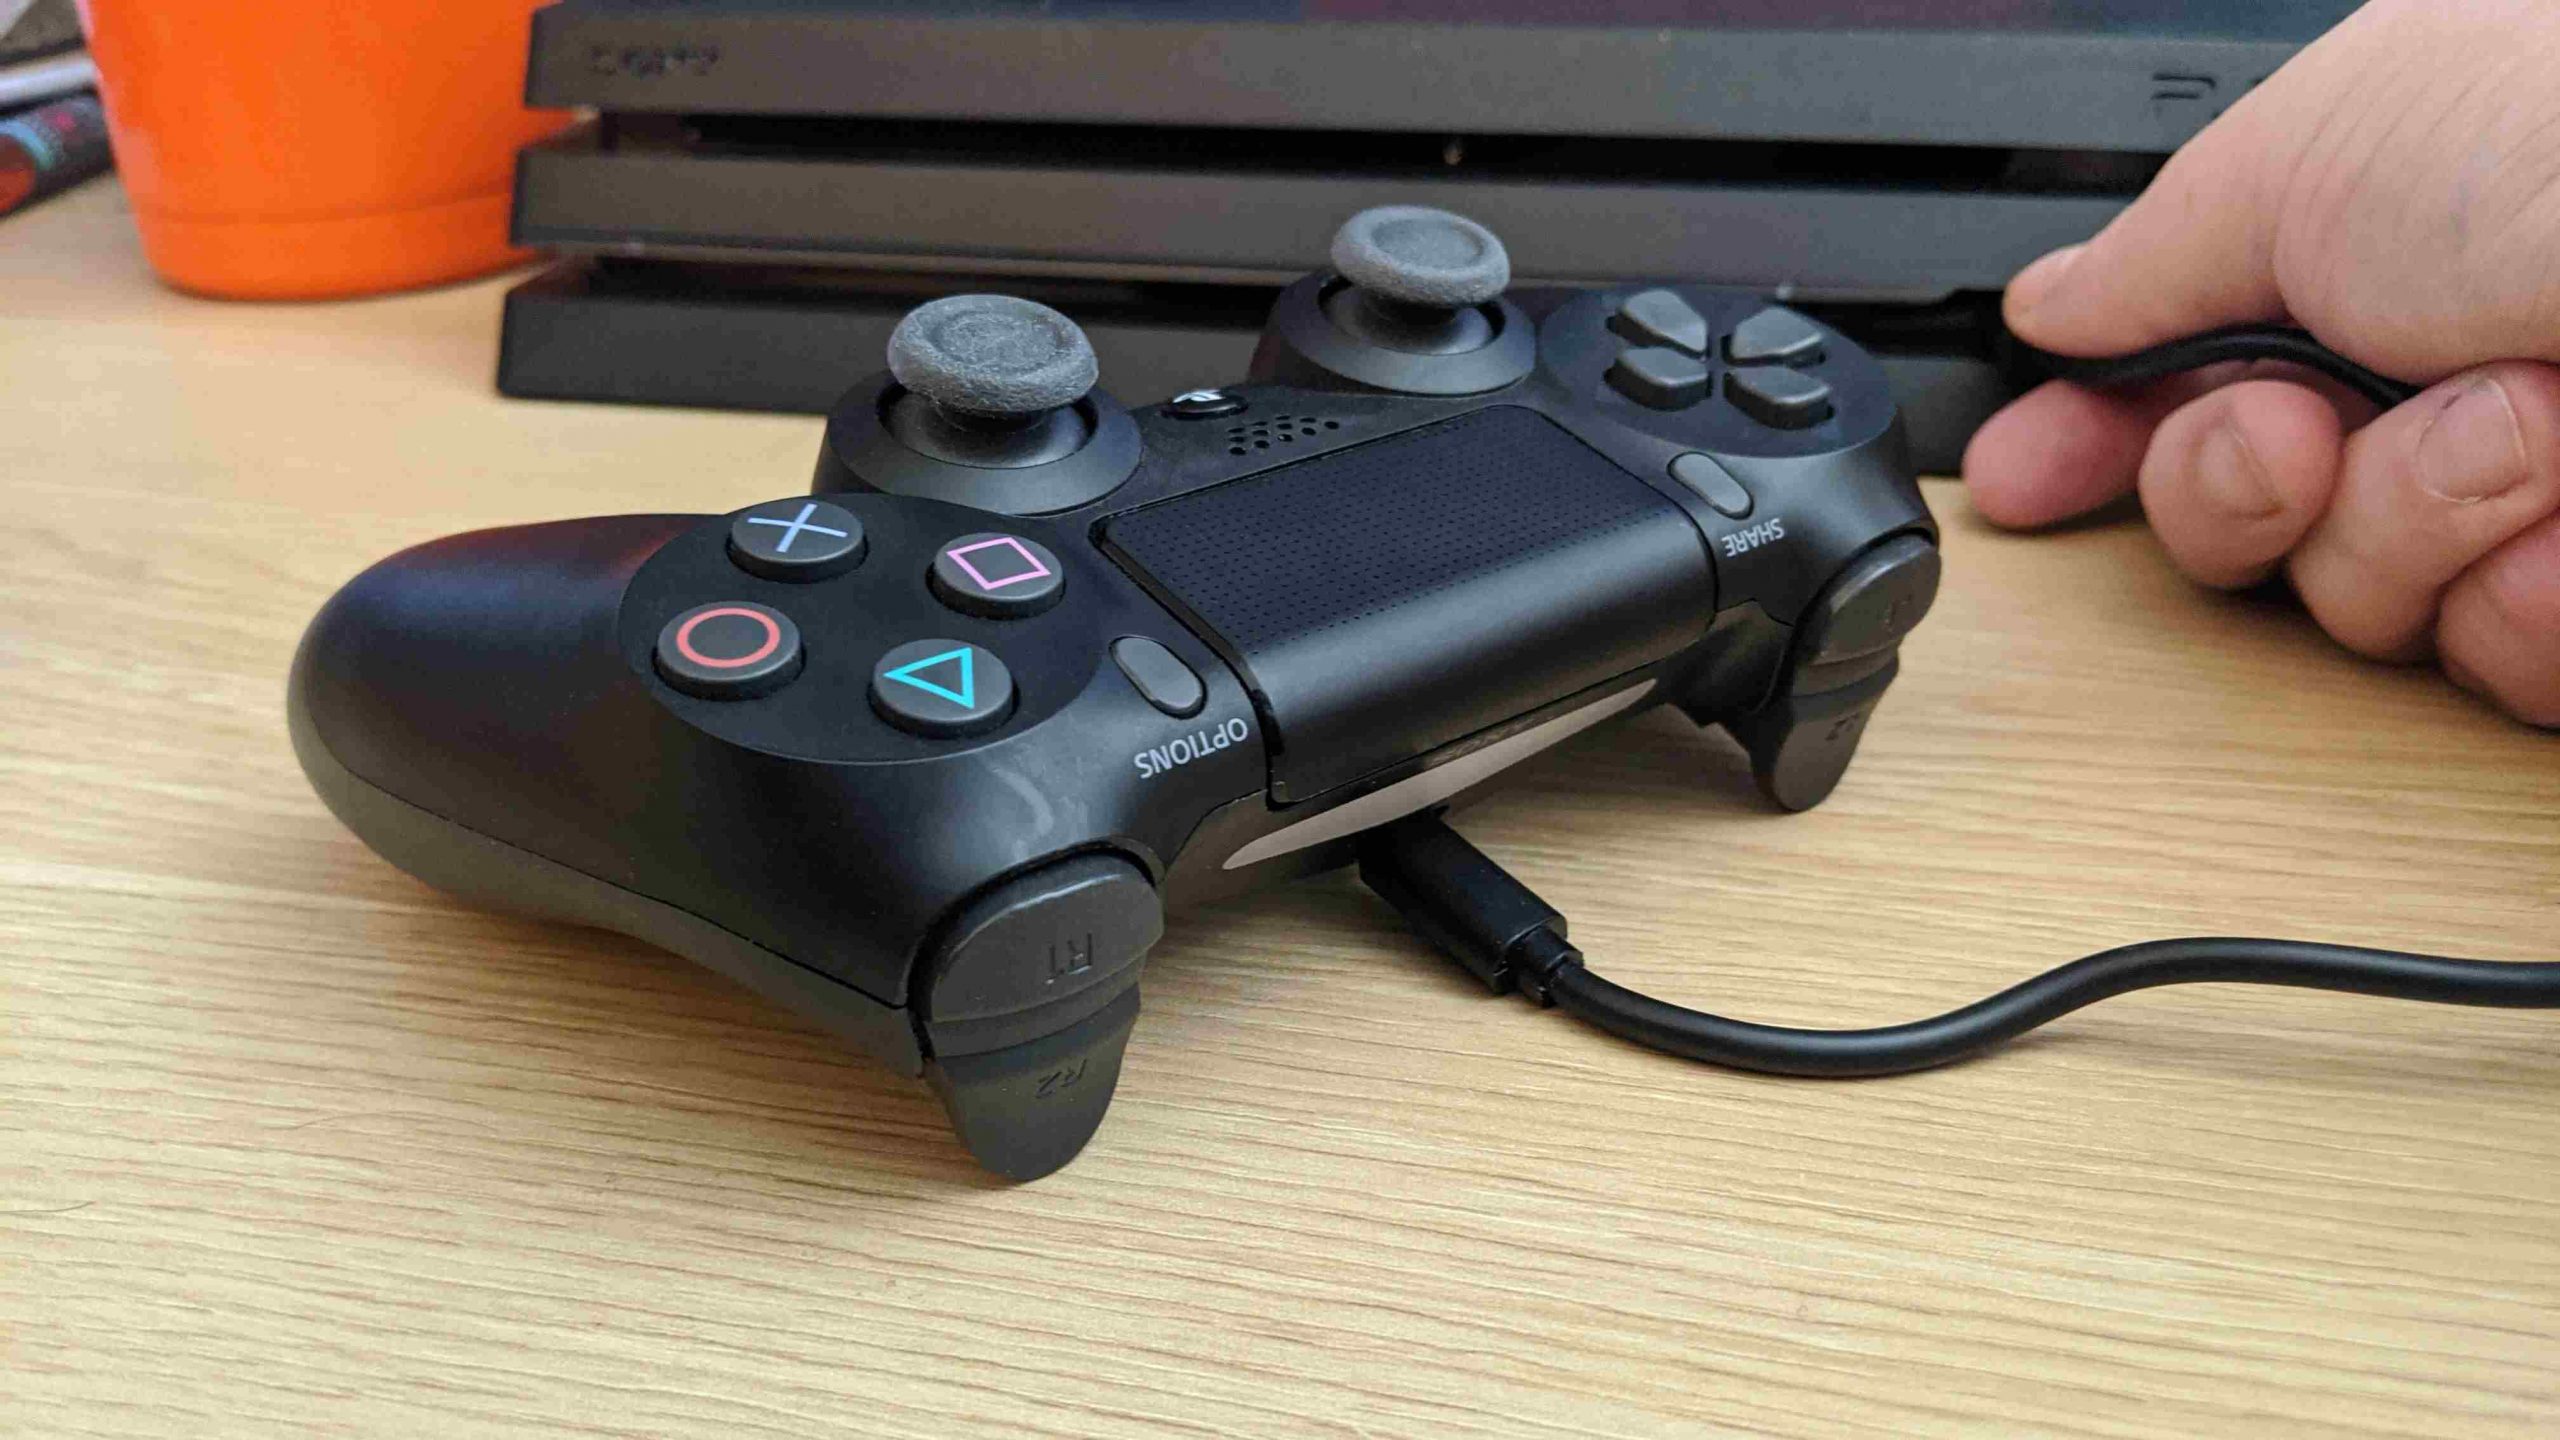 Charge PS4 controller using the USB cable from console